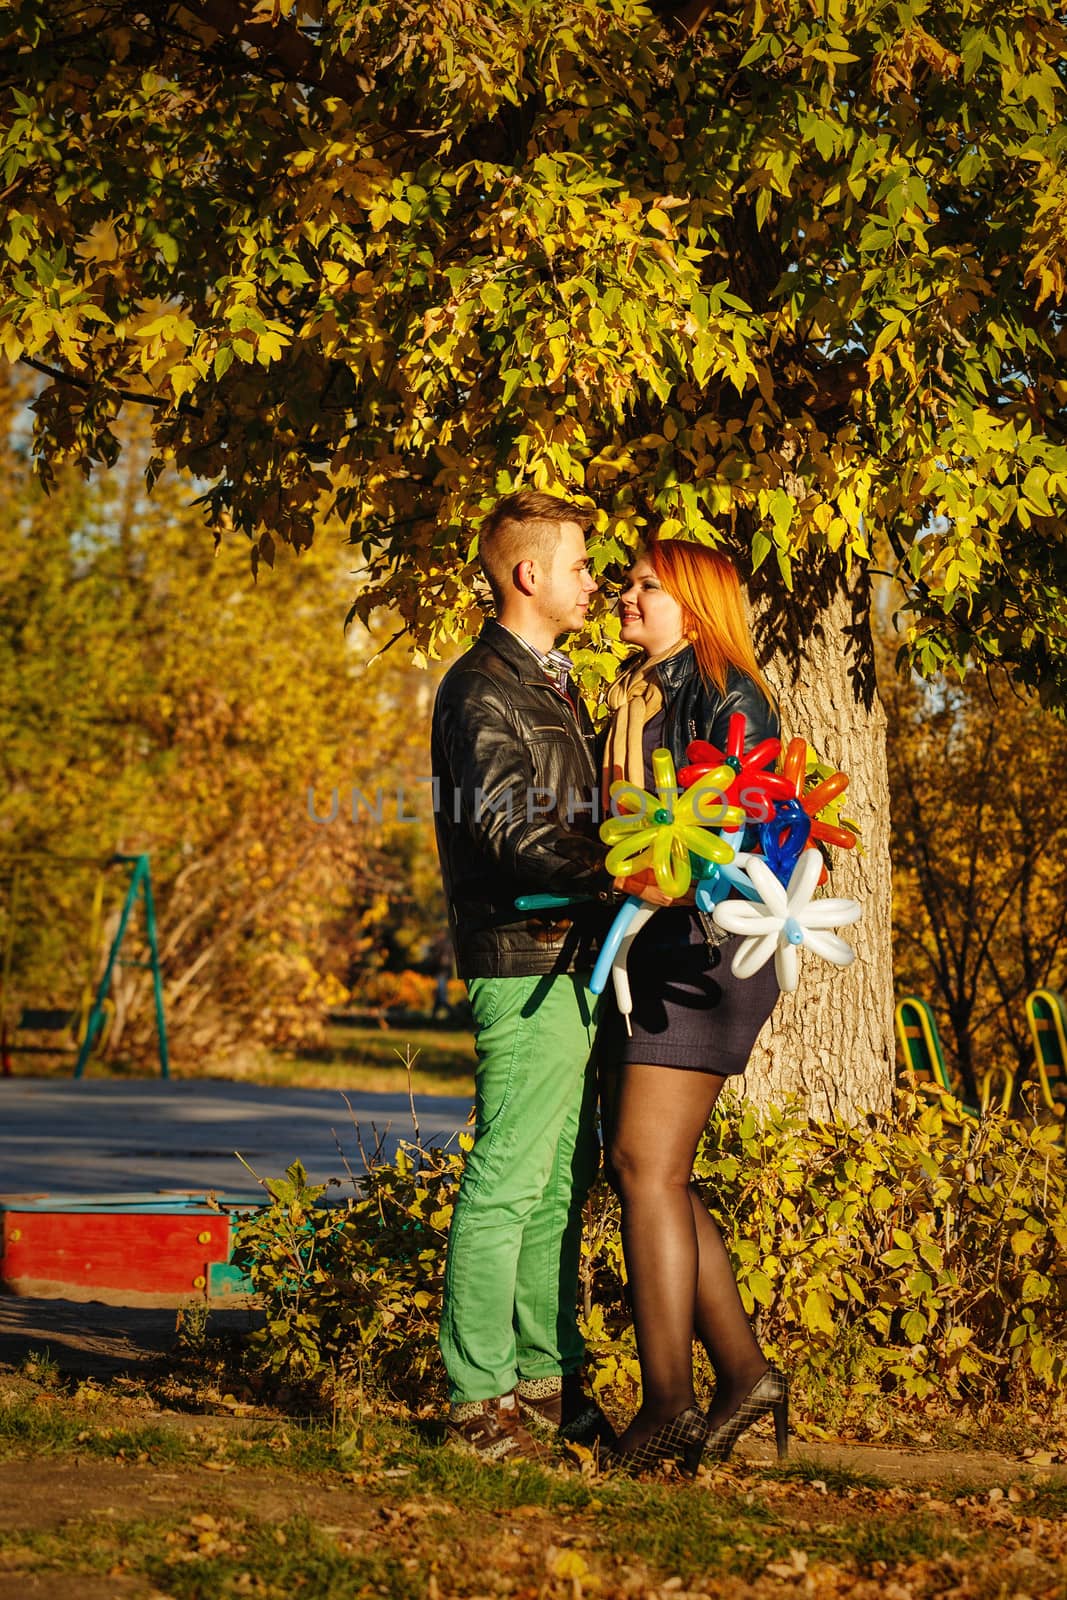 Young couple tenderly and lovingly looking at each other in autumn park